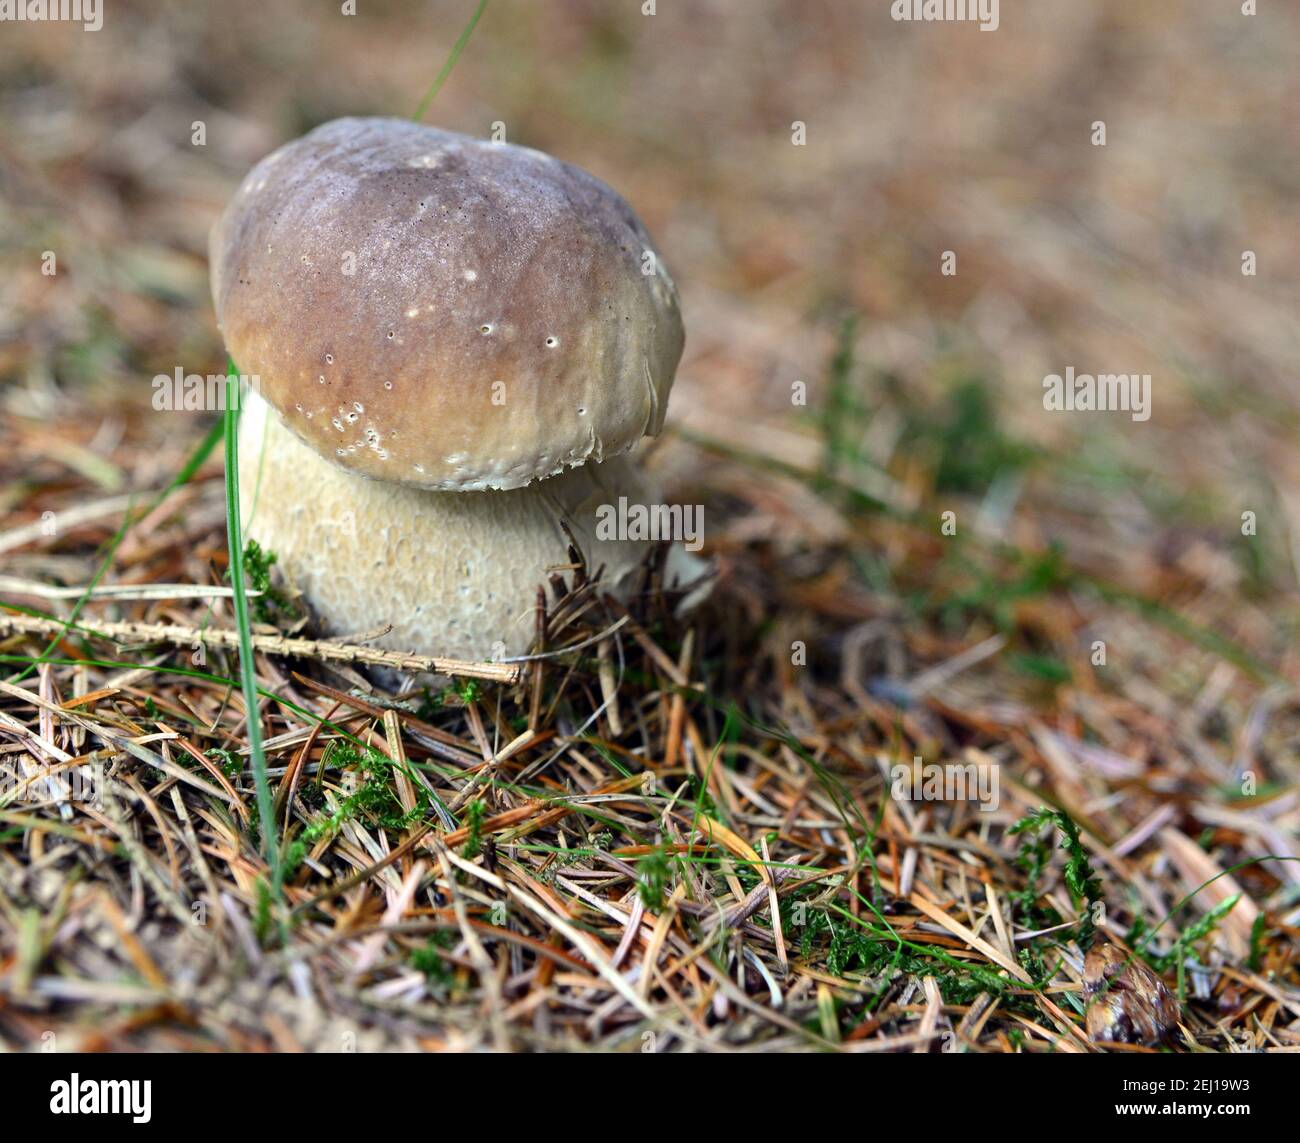 Wild porcini mushrooms growing in the forest Stock Photo